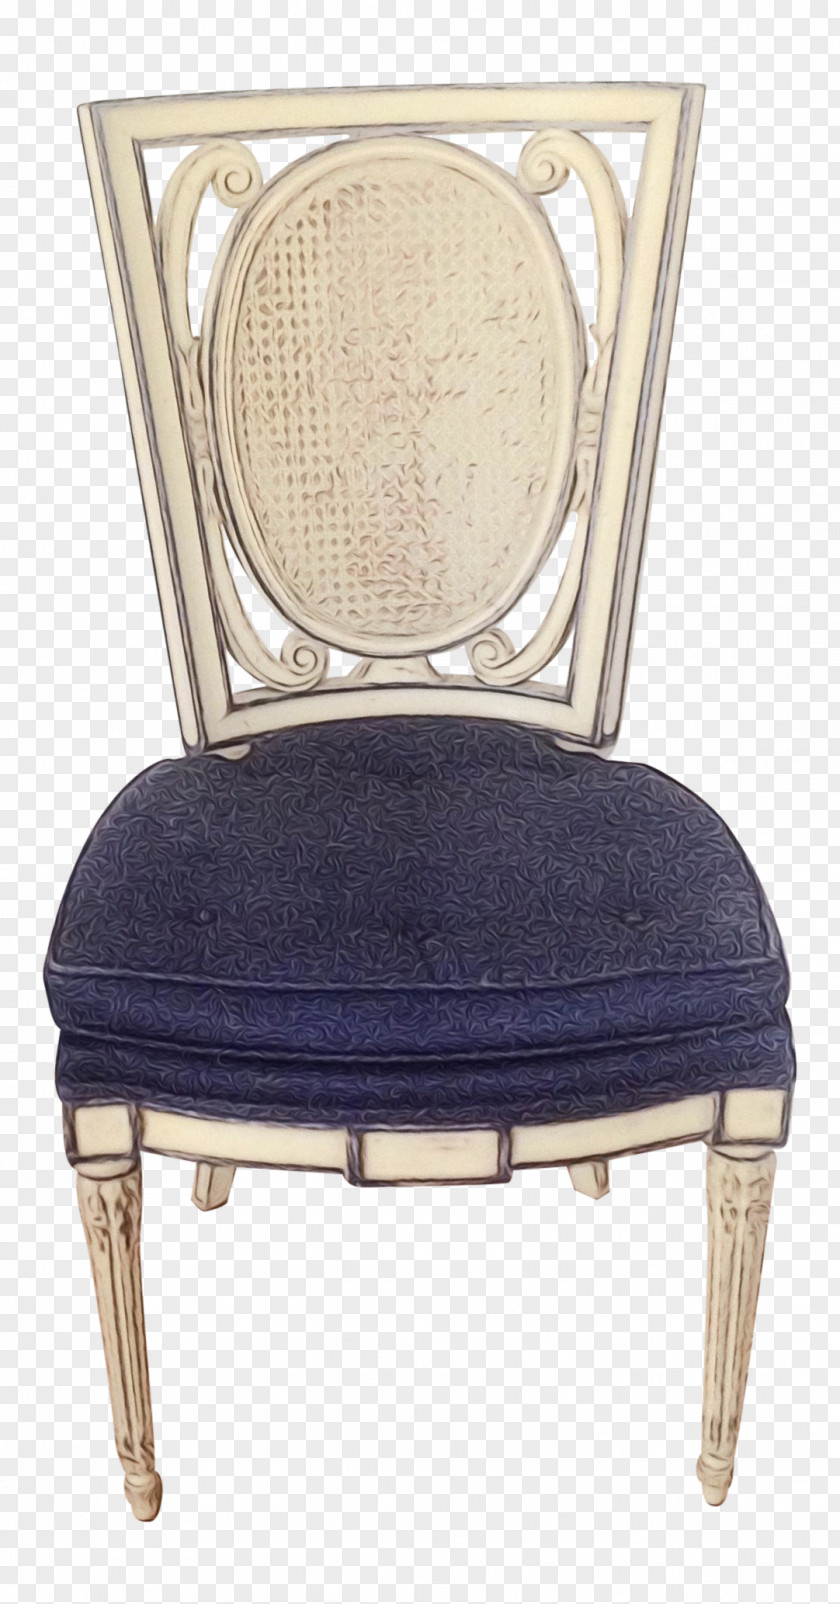 Antique Furniture Chair PNG